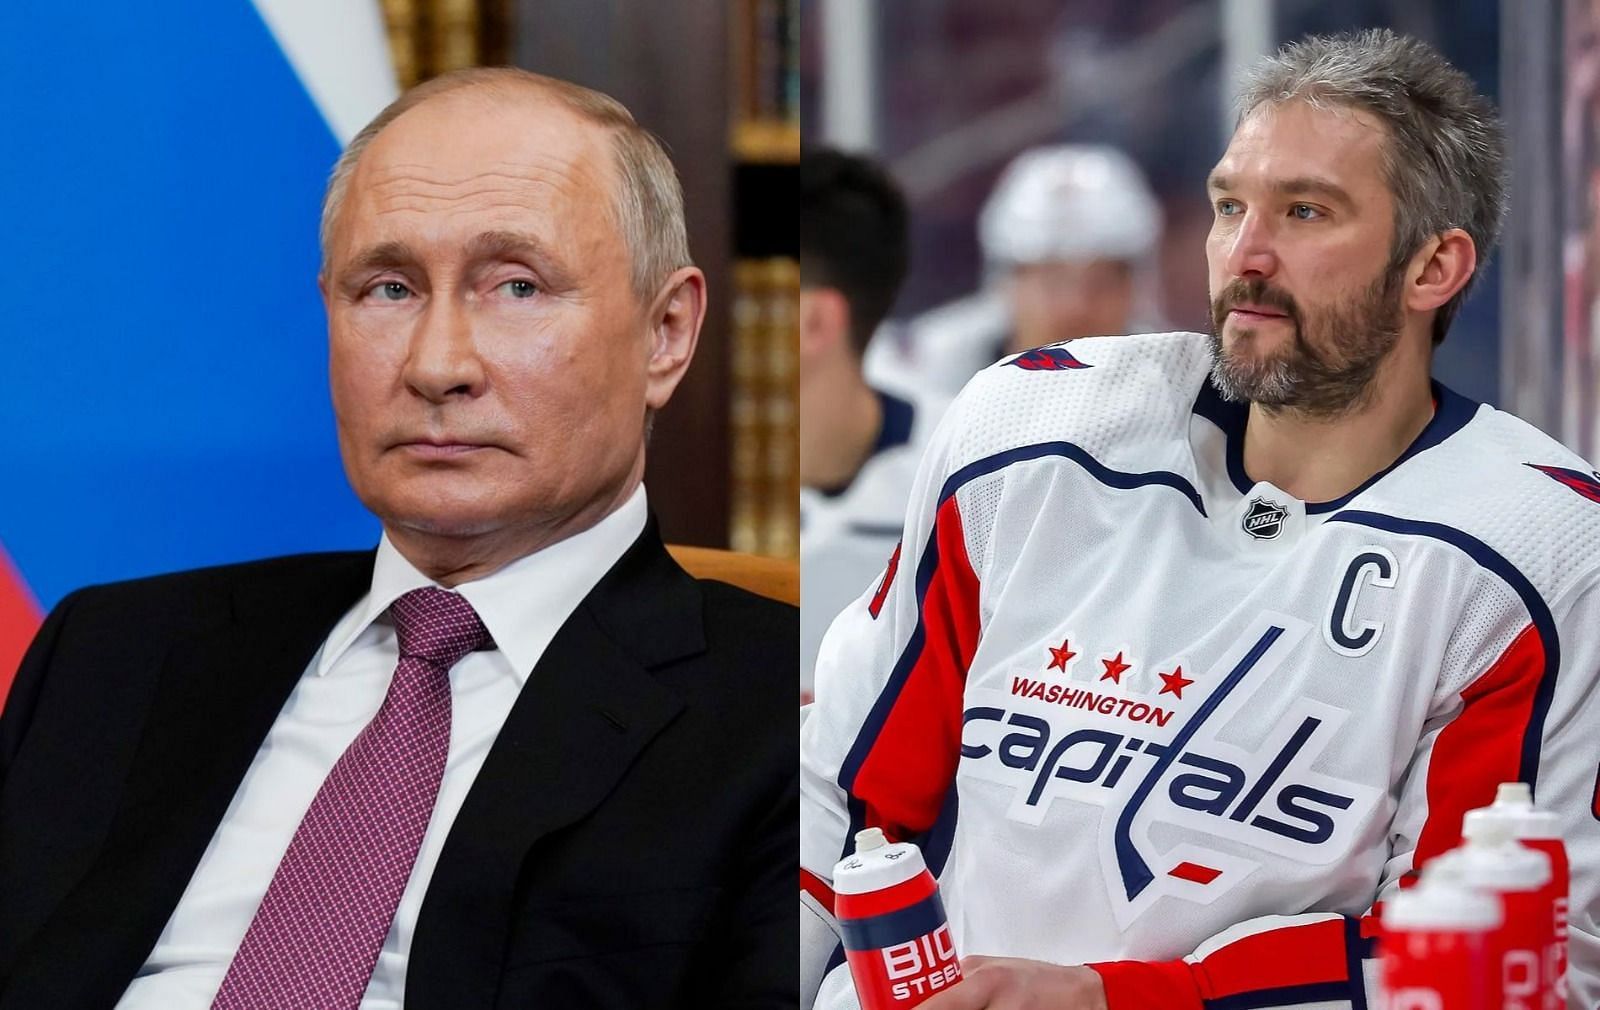 Alex Ovechkin will be the first Russian torch bearer for the 2014